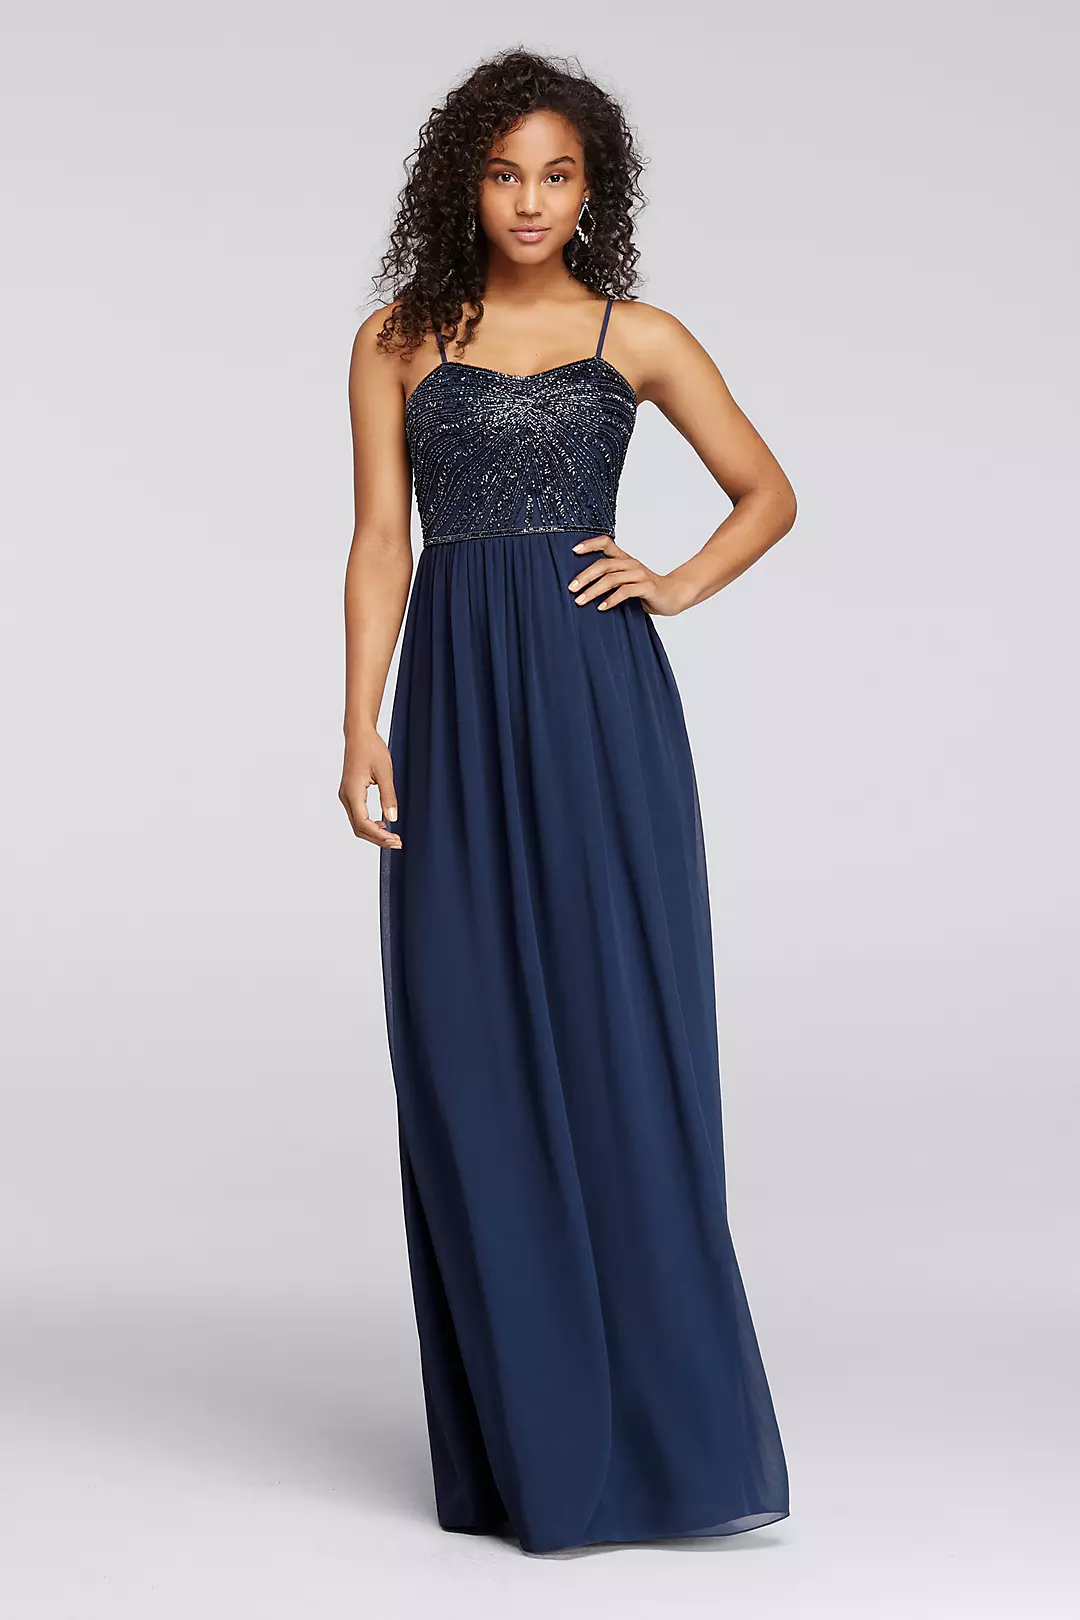 Long Dress with Spaghetti Straps and Beaded Bodice Image